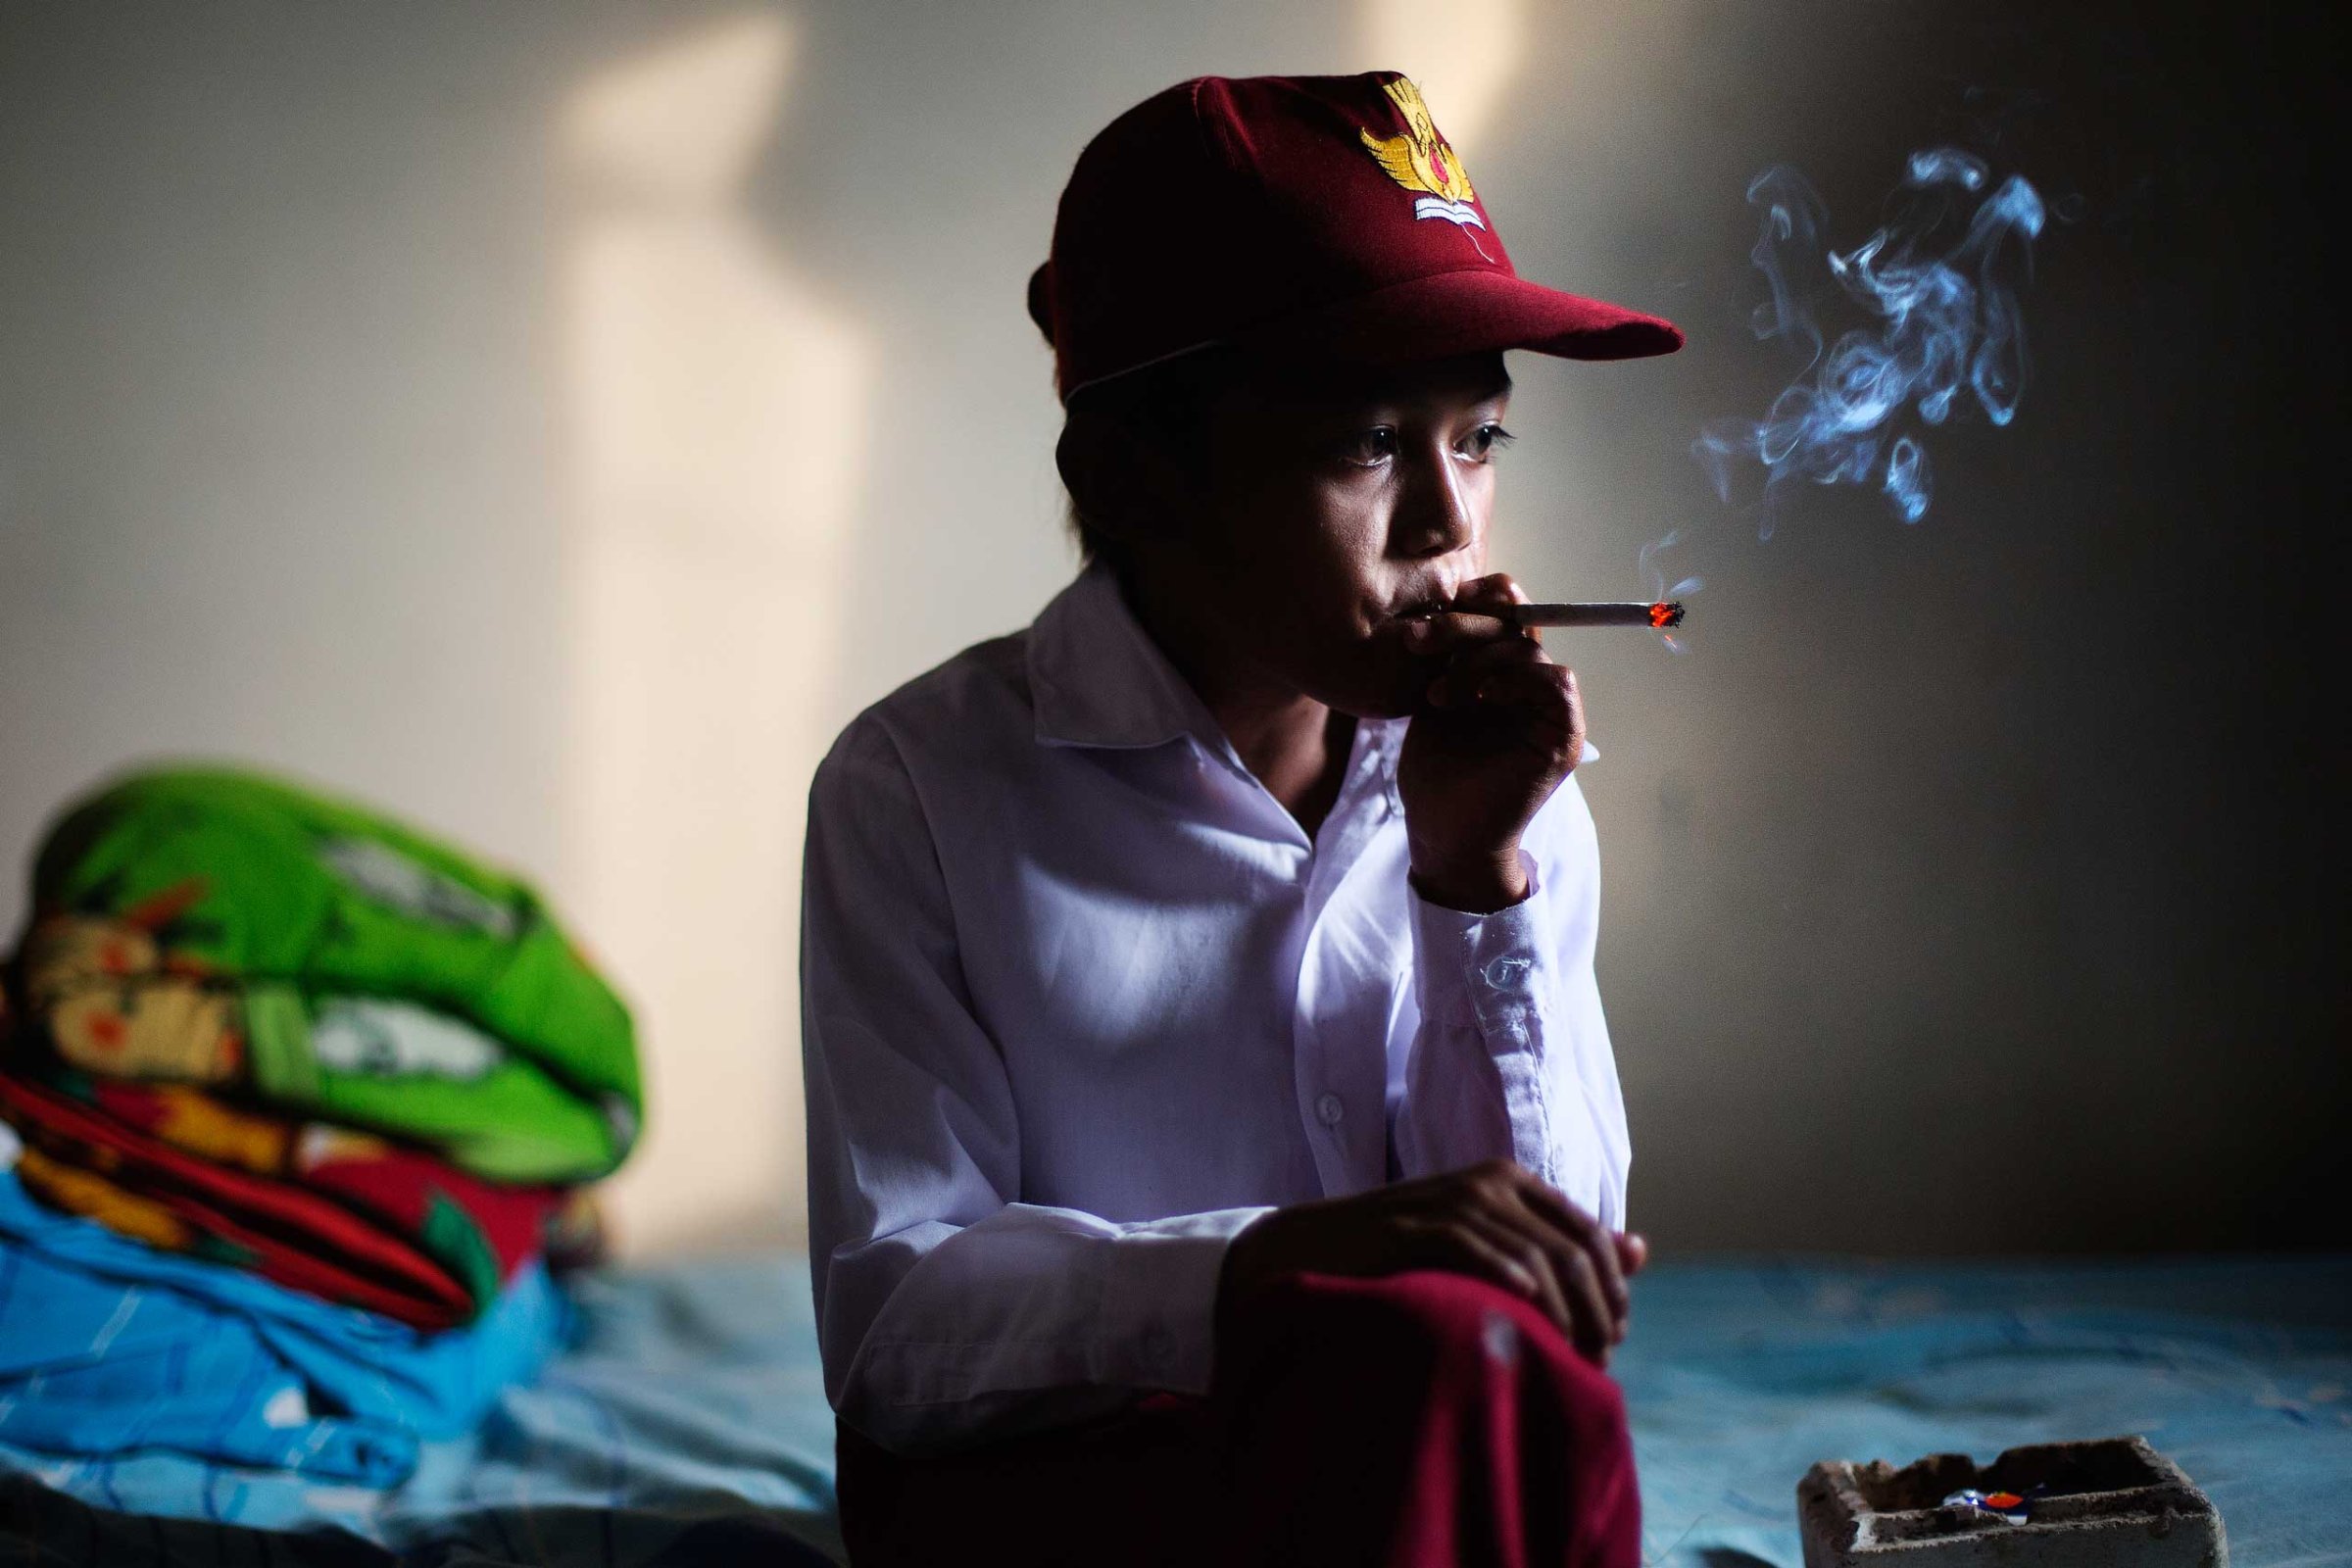 Ilham Hadi, who has smoked up to two packs a day and began when he was four years old, poses for a photo wearing his third grade uniform while smoking in his bedroom in a village near the town of Sukabumi, Indonesia on February 14, 2014.